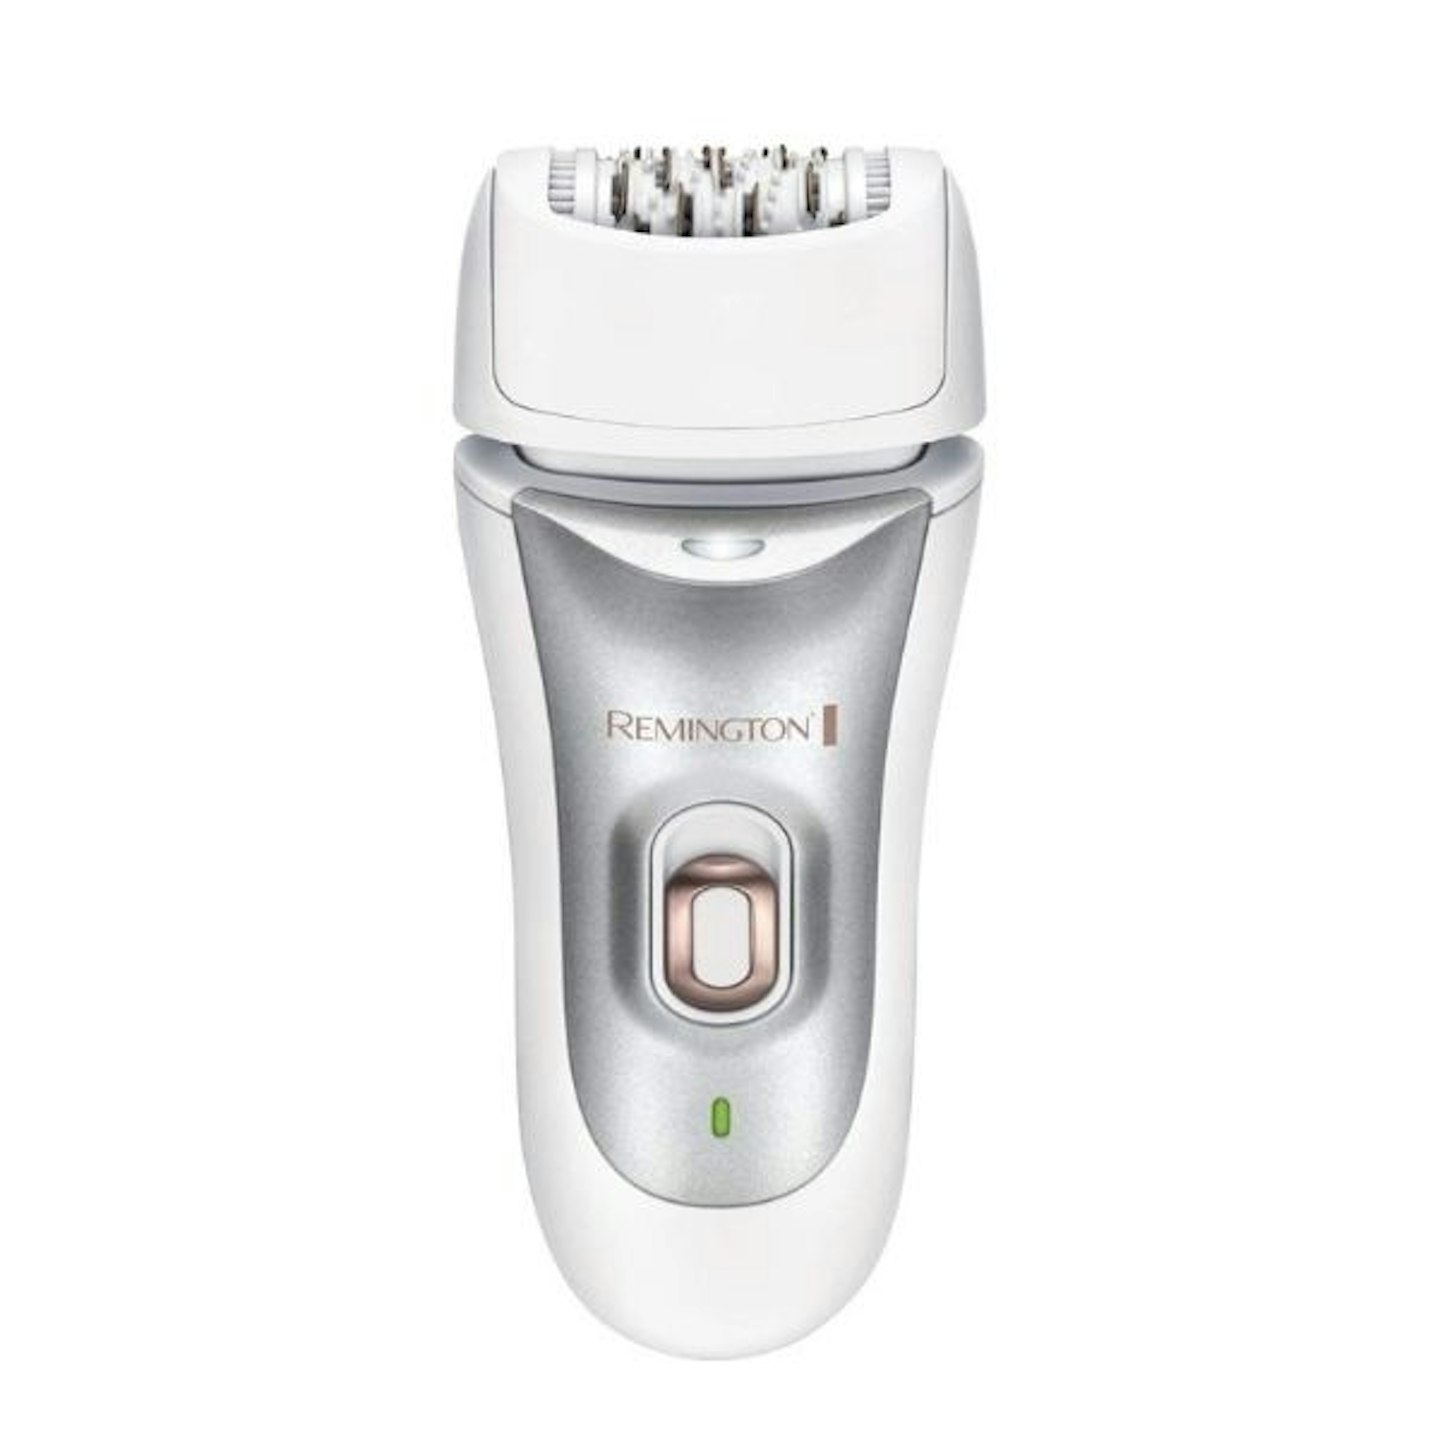 Remington EP7700 7-in-1 Wet and Dry Cordless Epilator